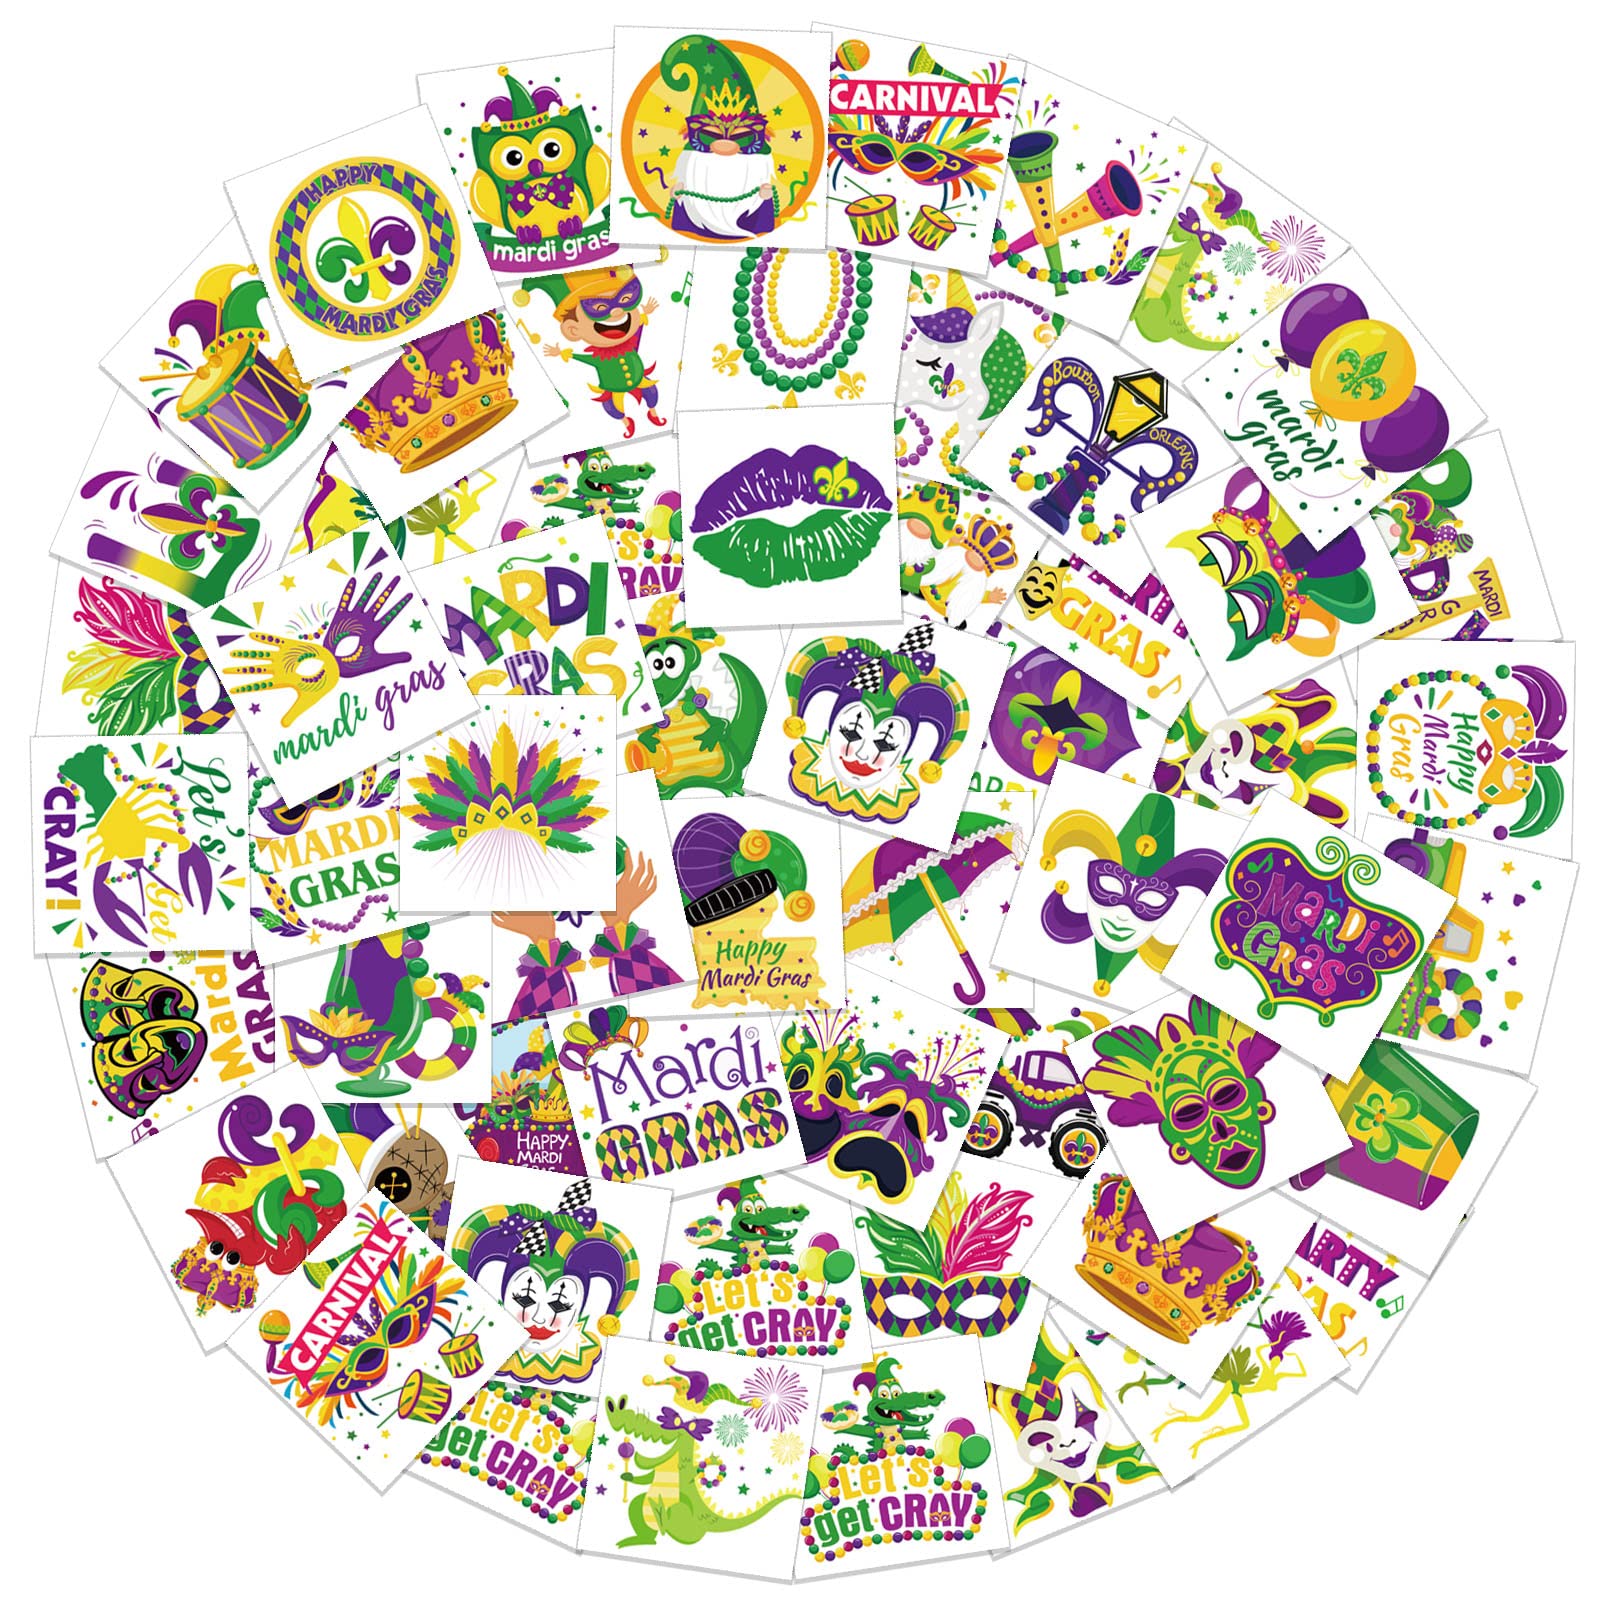 HOWAF 96 Pieces Mardi Gras Temporary Tattoos, 48 Styles New Orleans Party Temporary Tattoos Stickers for Kid, Mardi Gras Themed Fake Tattoos with Crown, Mask Design for Masquerade Party Decoration